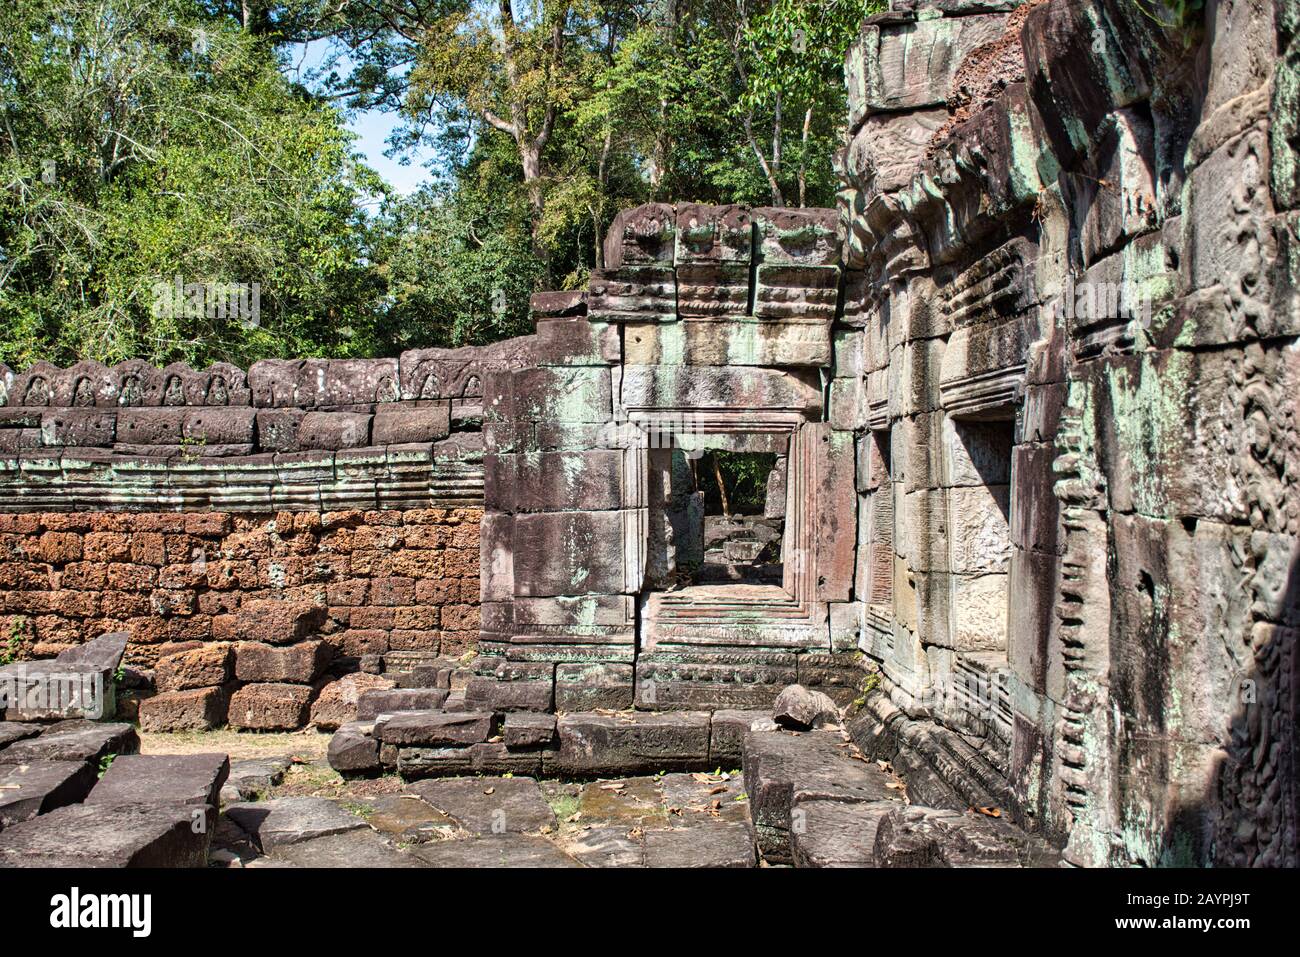 Preah Khan Temple site among the ancient ruins of Angkor Wat Hindu temple complex in Siem Reap, Cambodia, built in the 12th century for King Jayavarma Stock Photo